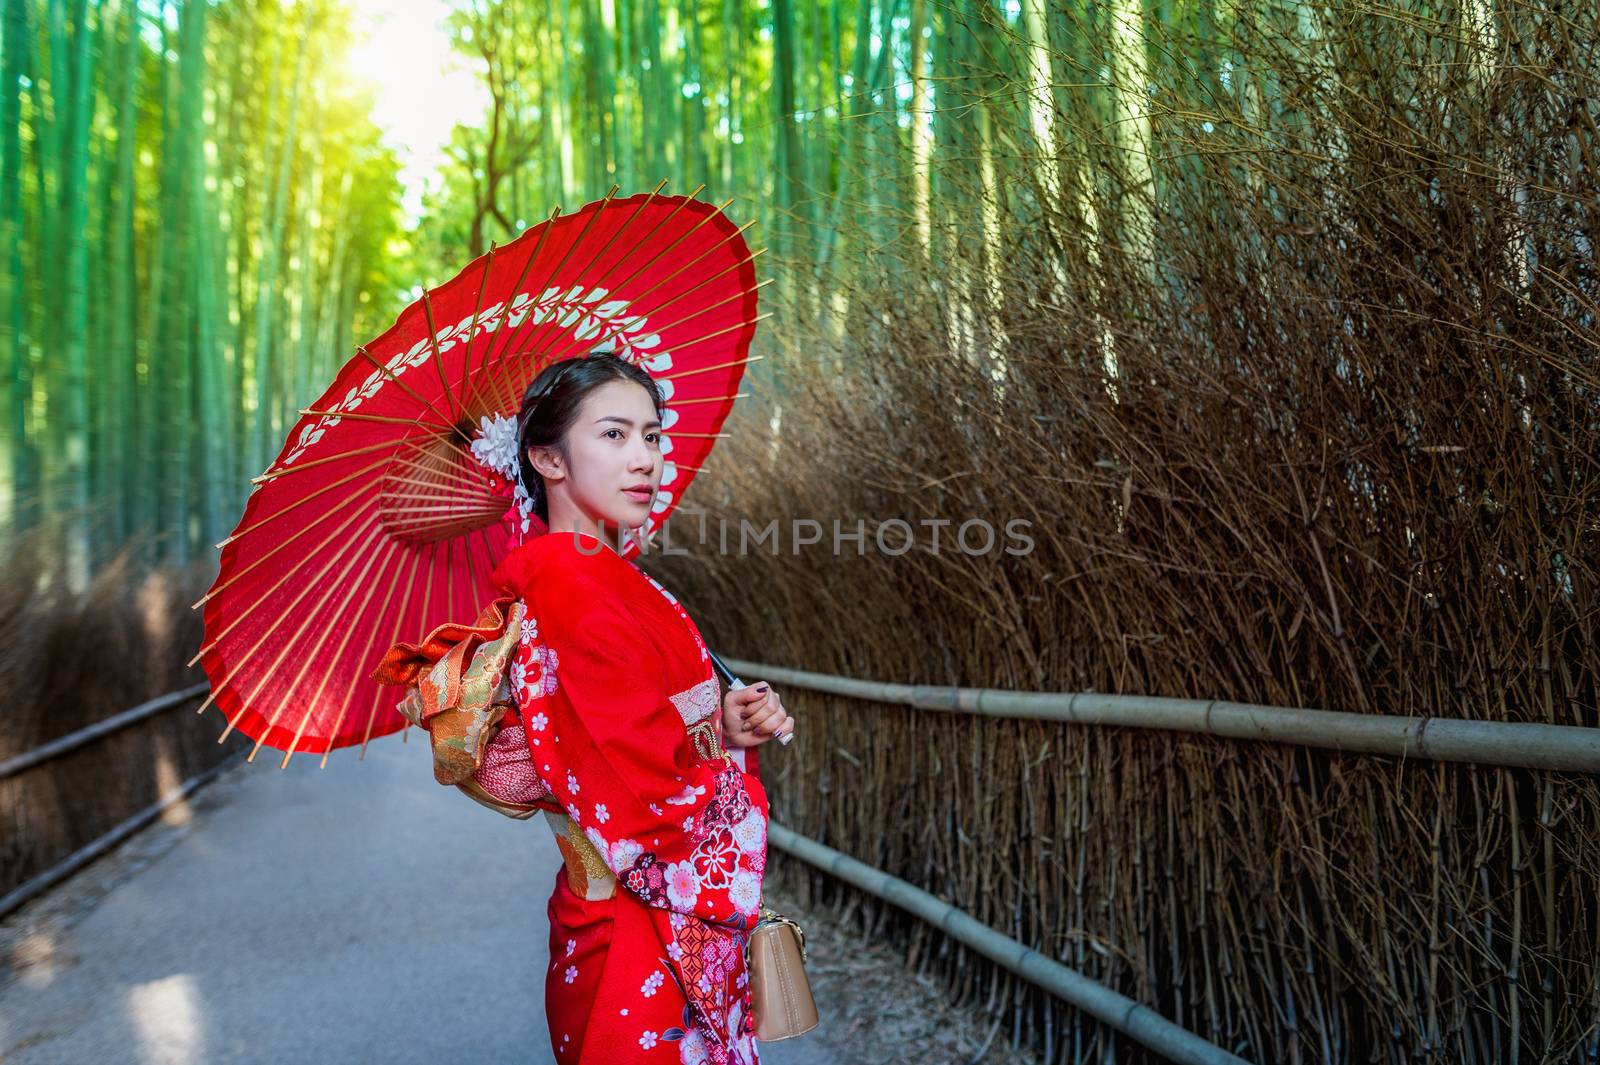 Bamboo Forest. Asian woman wearing japanese traditional kimono at Bamboo Forest in Kyoto, Japan.